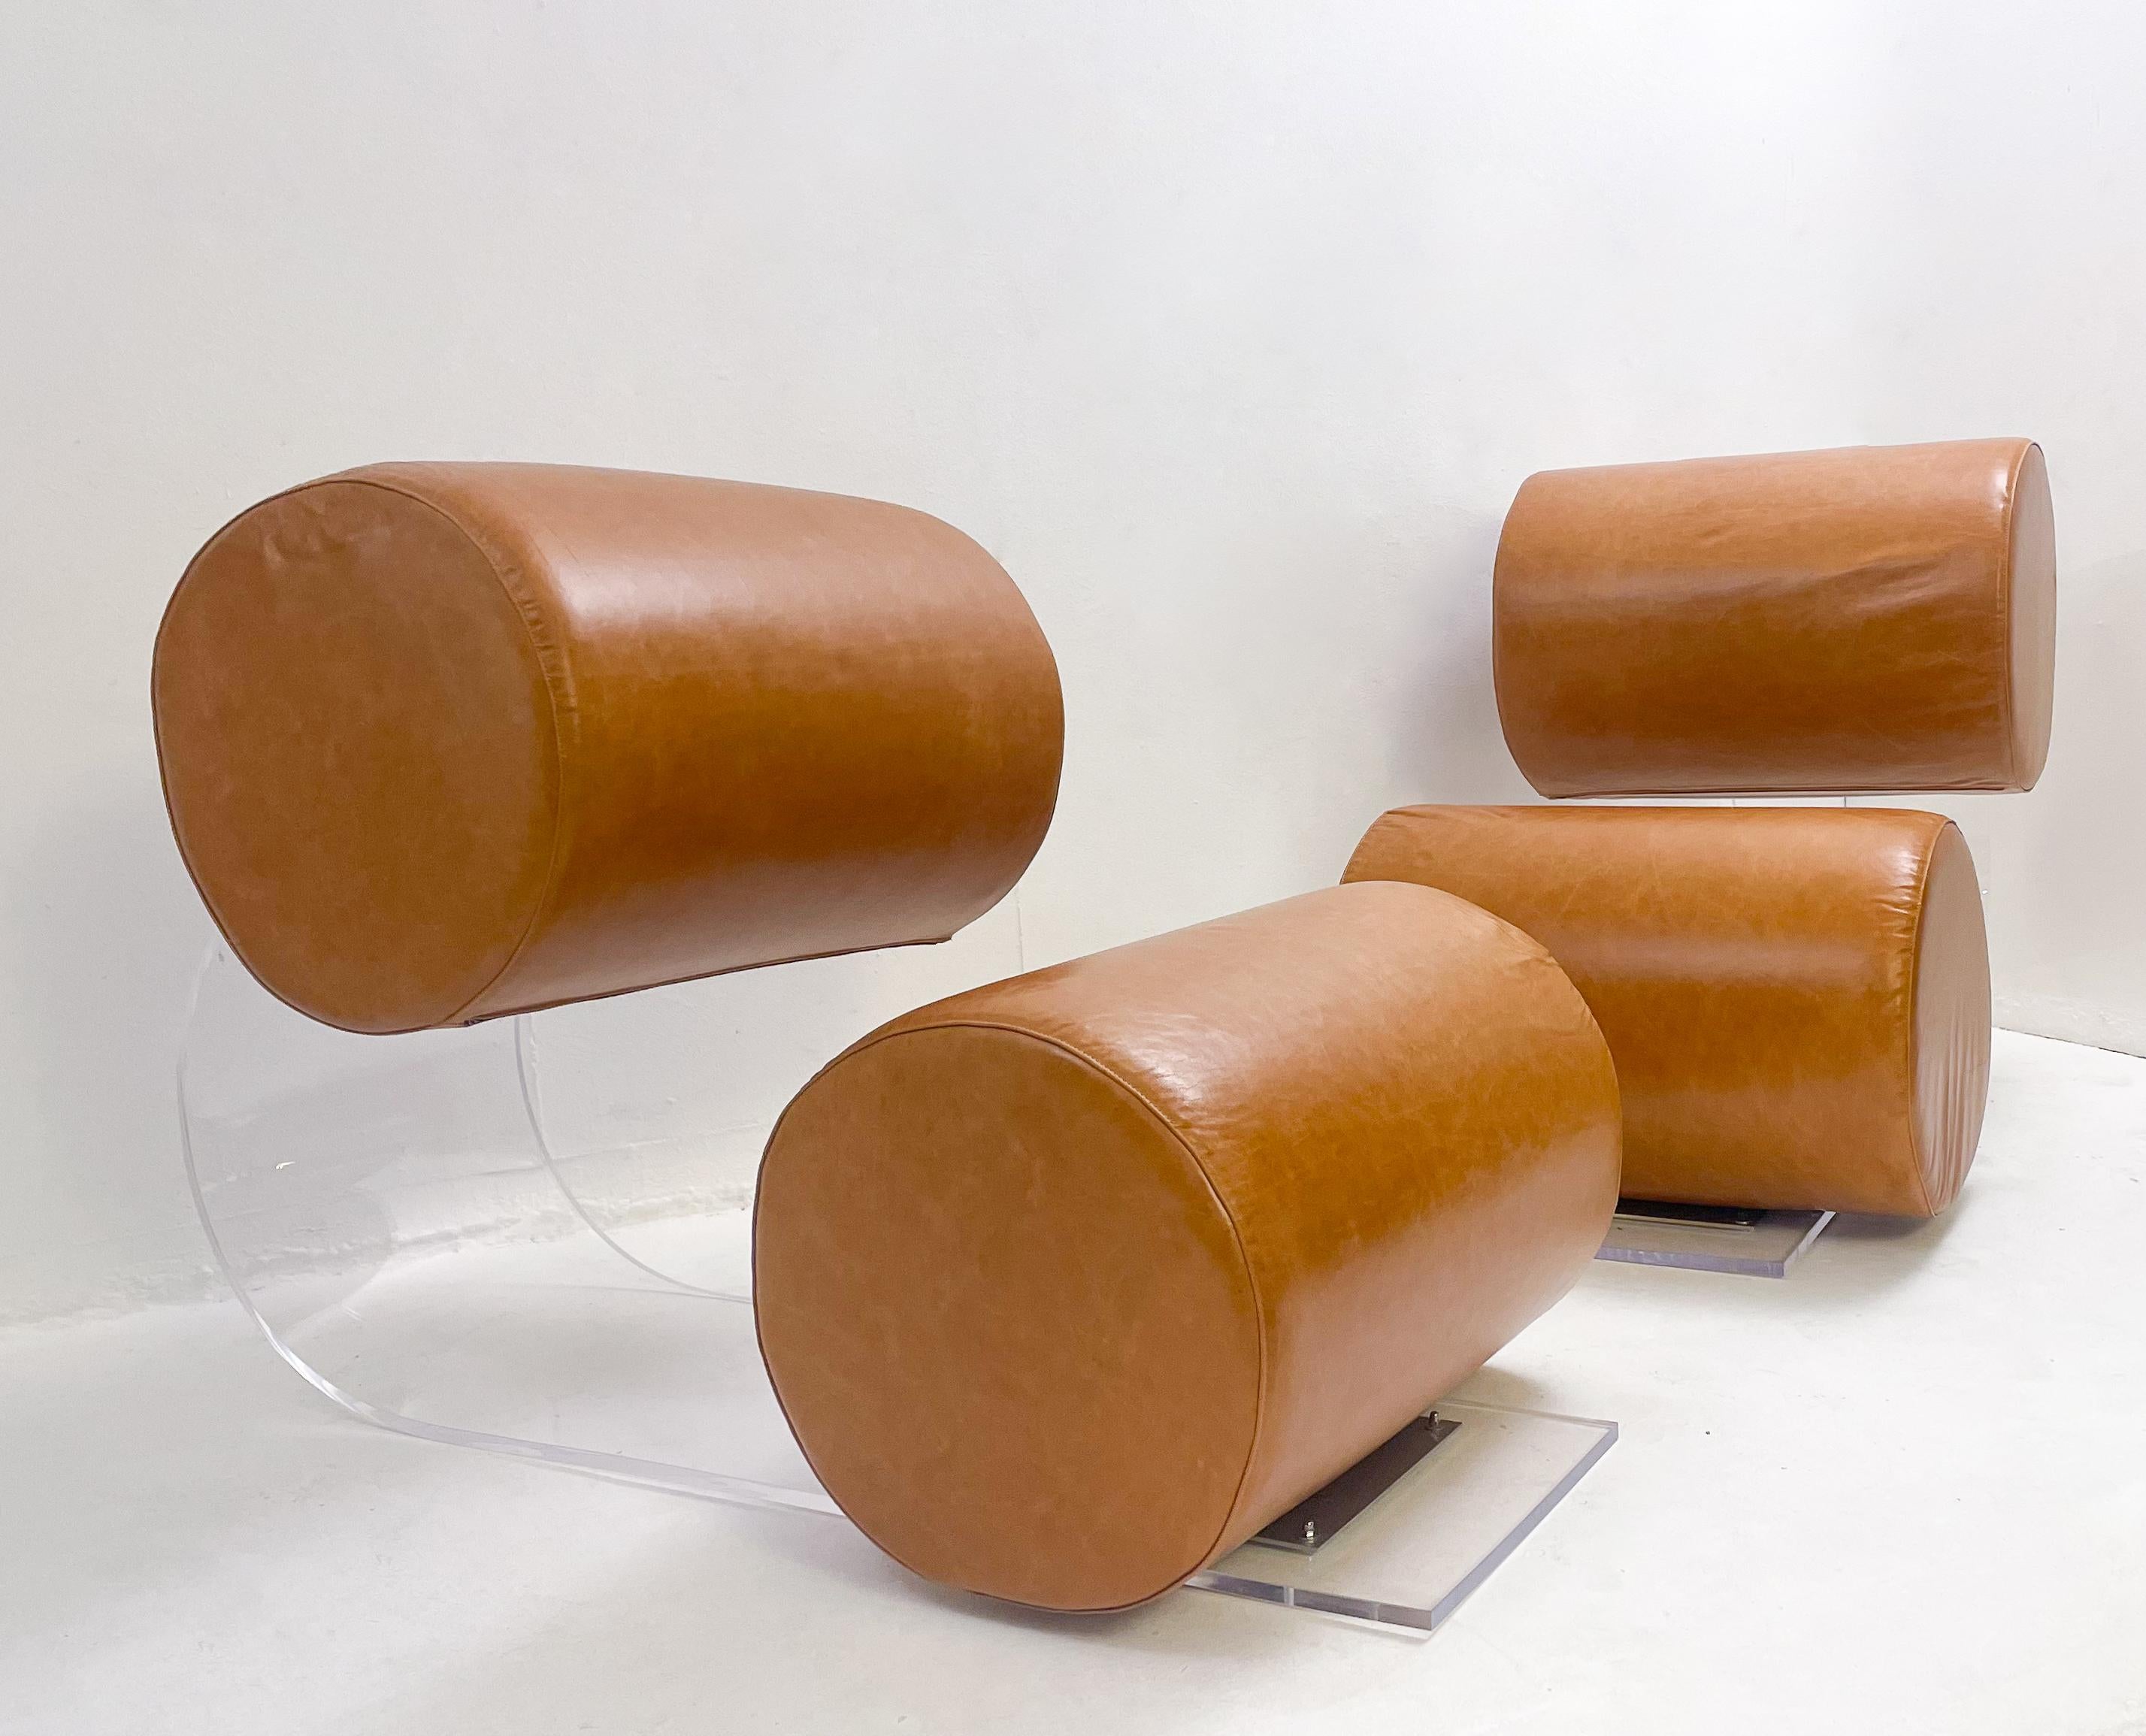  Pair of Cognac Armchairs by Marzio Cecchi, Plexiglas and Leather, 1970s In Good Condition For Sale In Brussels, BE